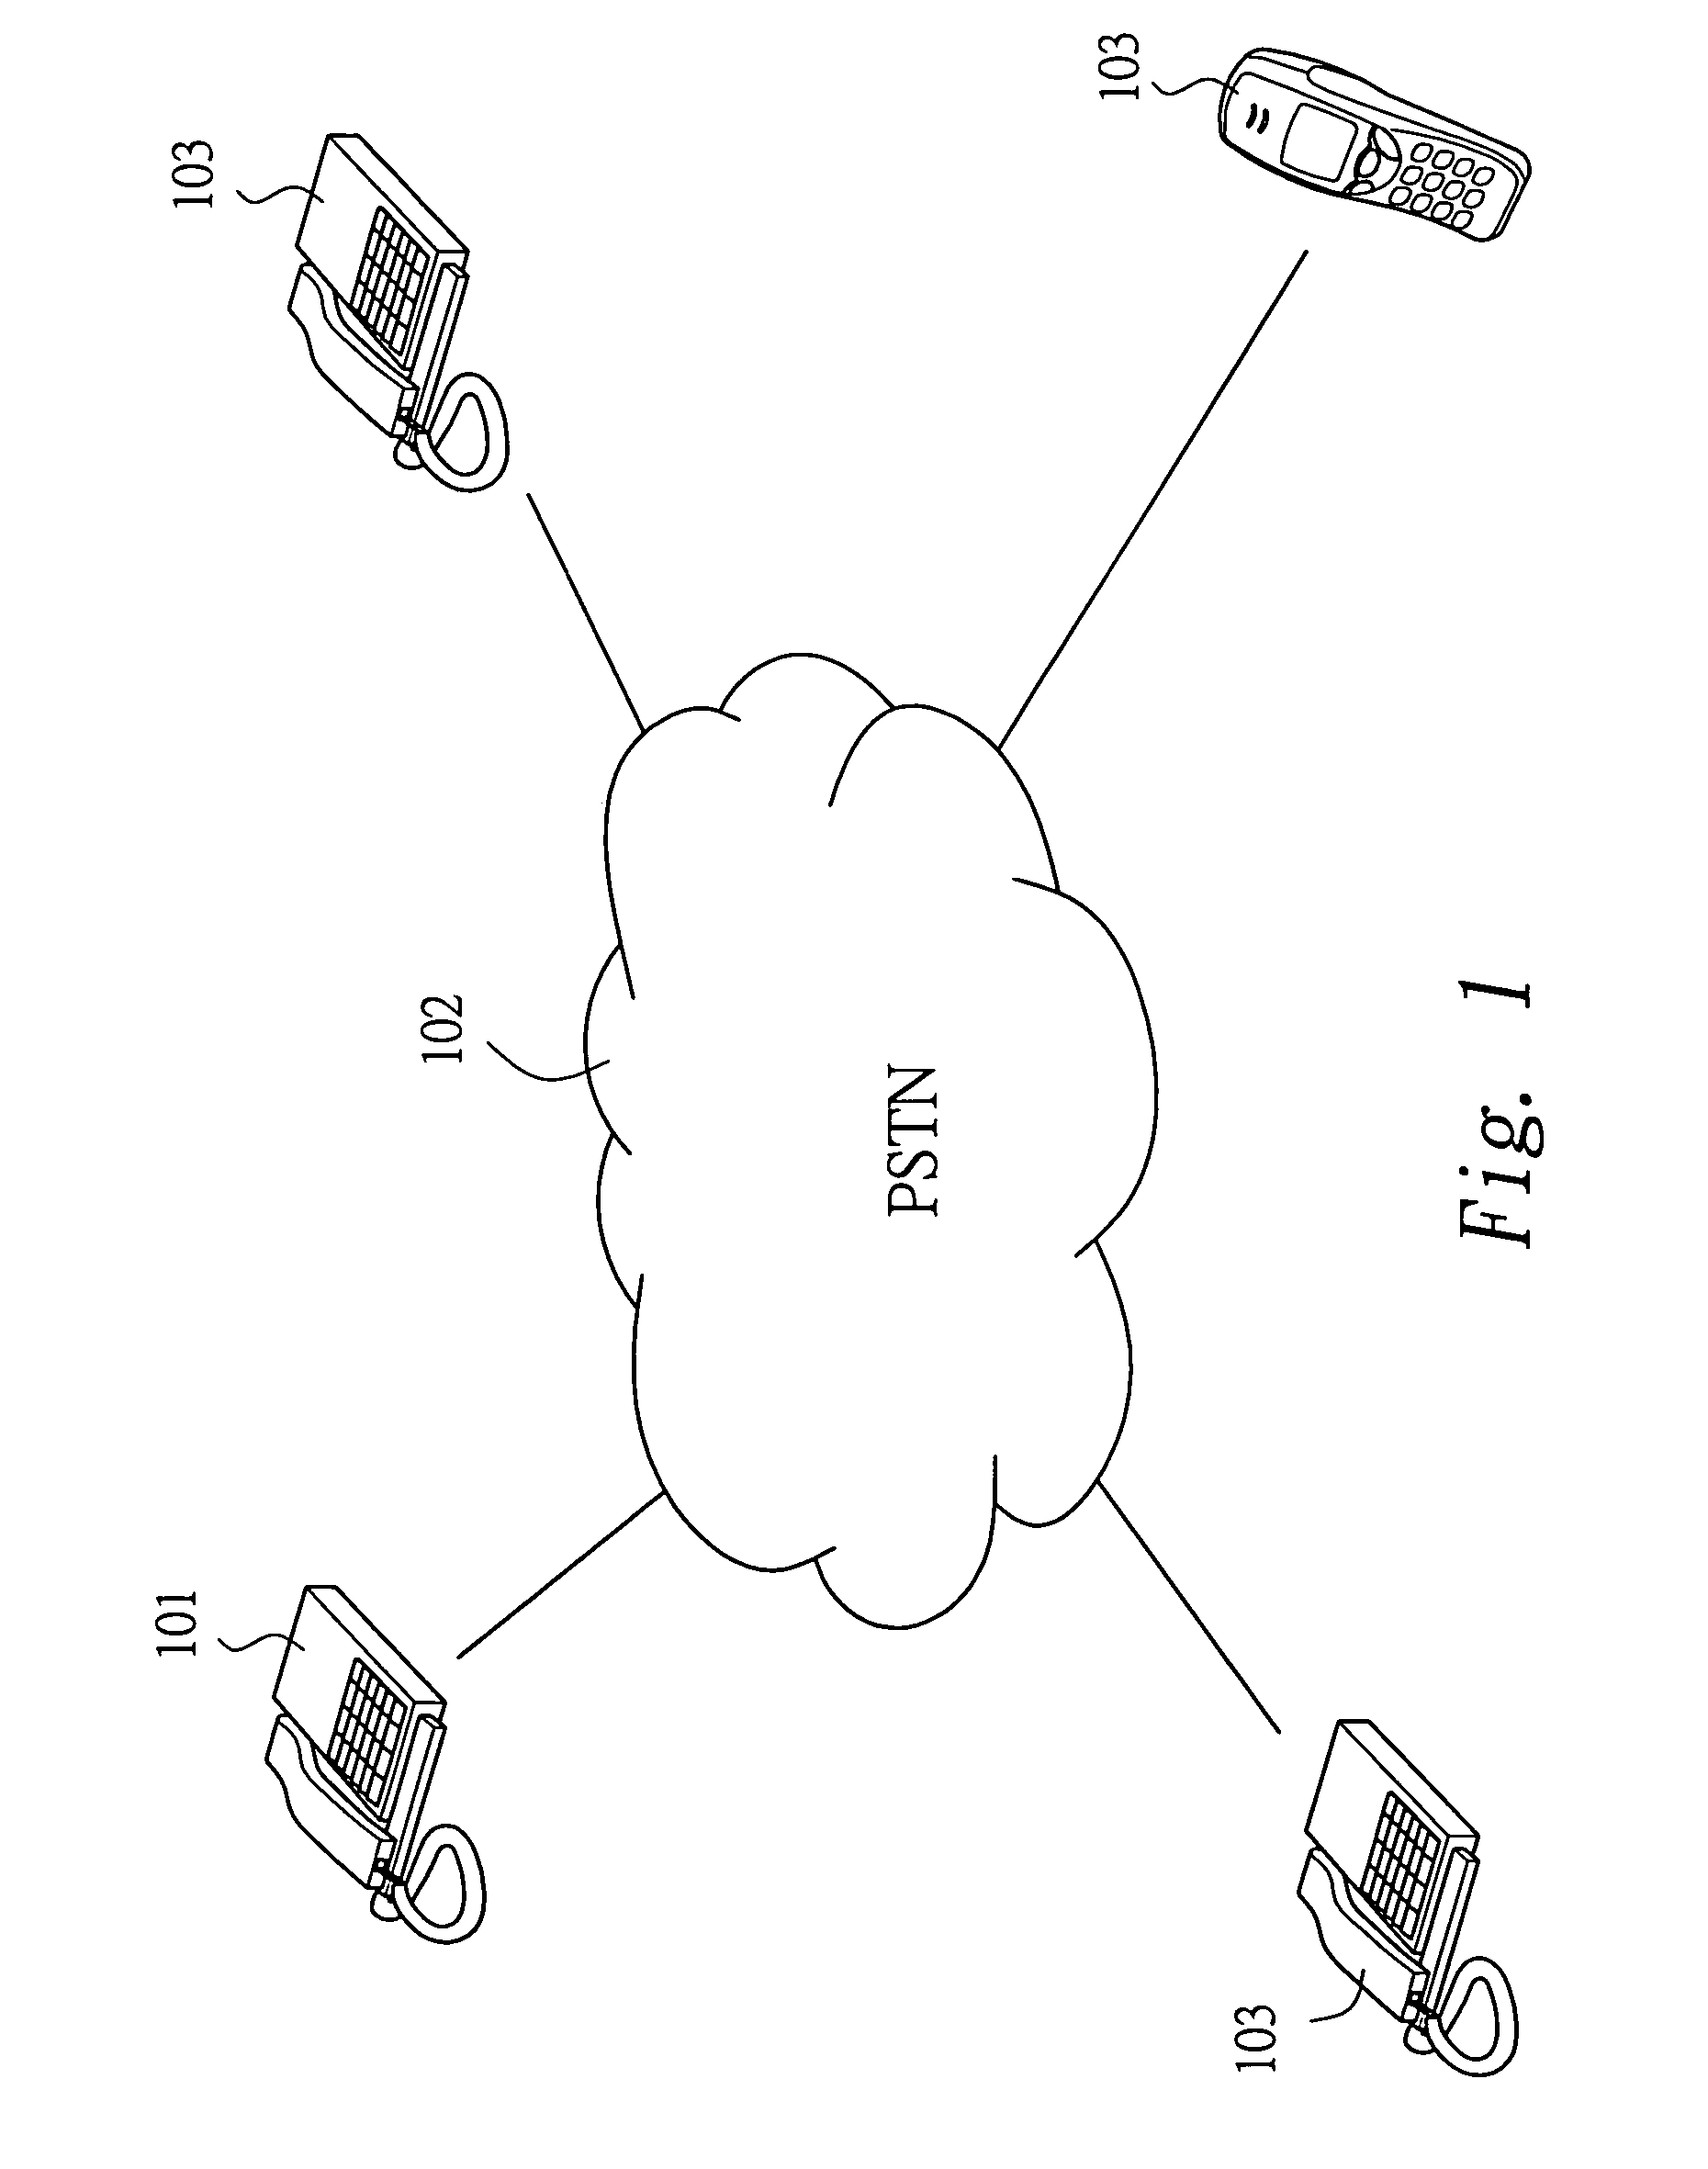 Communication method for placing phone calls by using a fixed dial plan